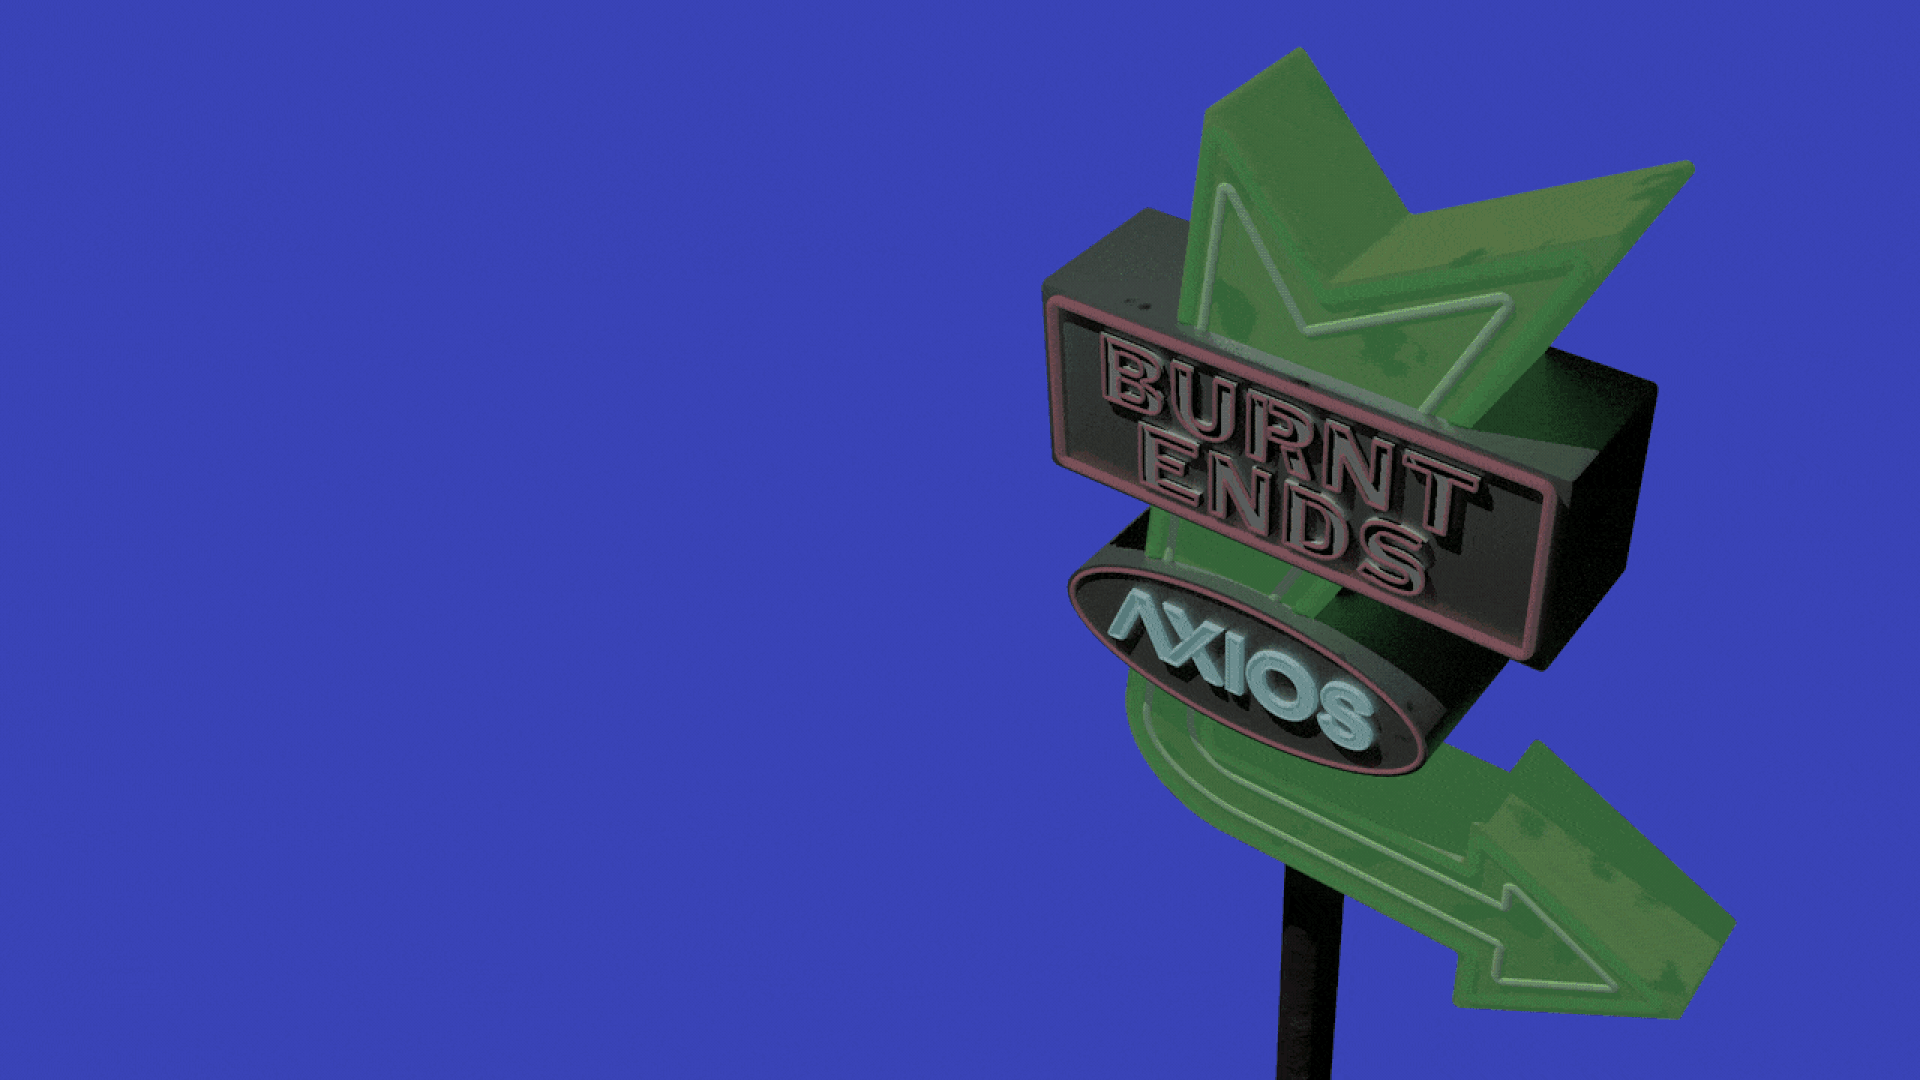 Illustration of the Deep Ellum neon sign, which says "Burnt Ends" and "Axios" instead of "Deep Ellum" and "Texas."